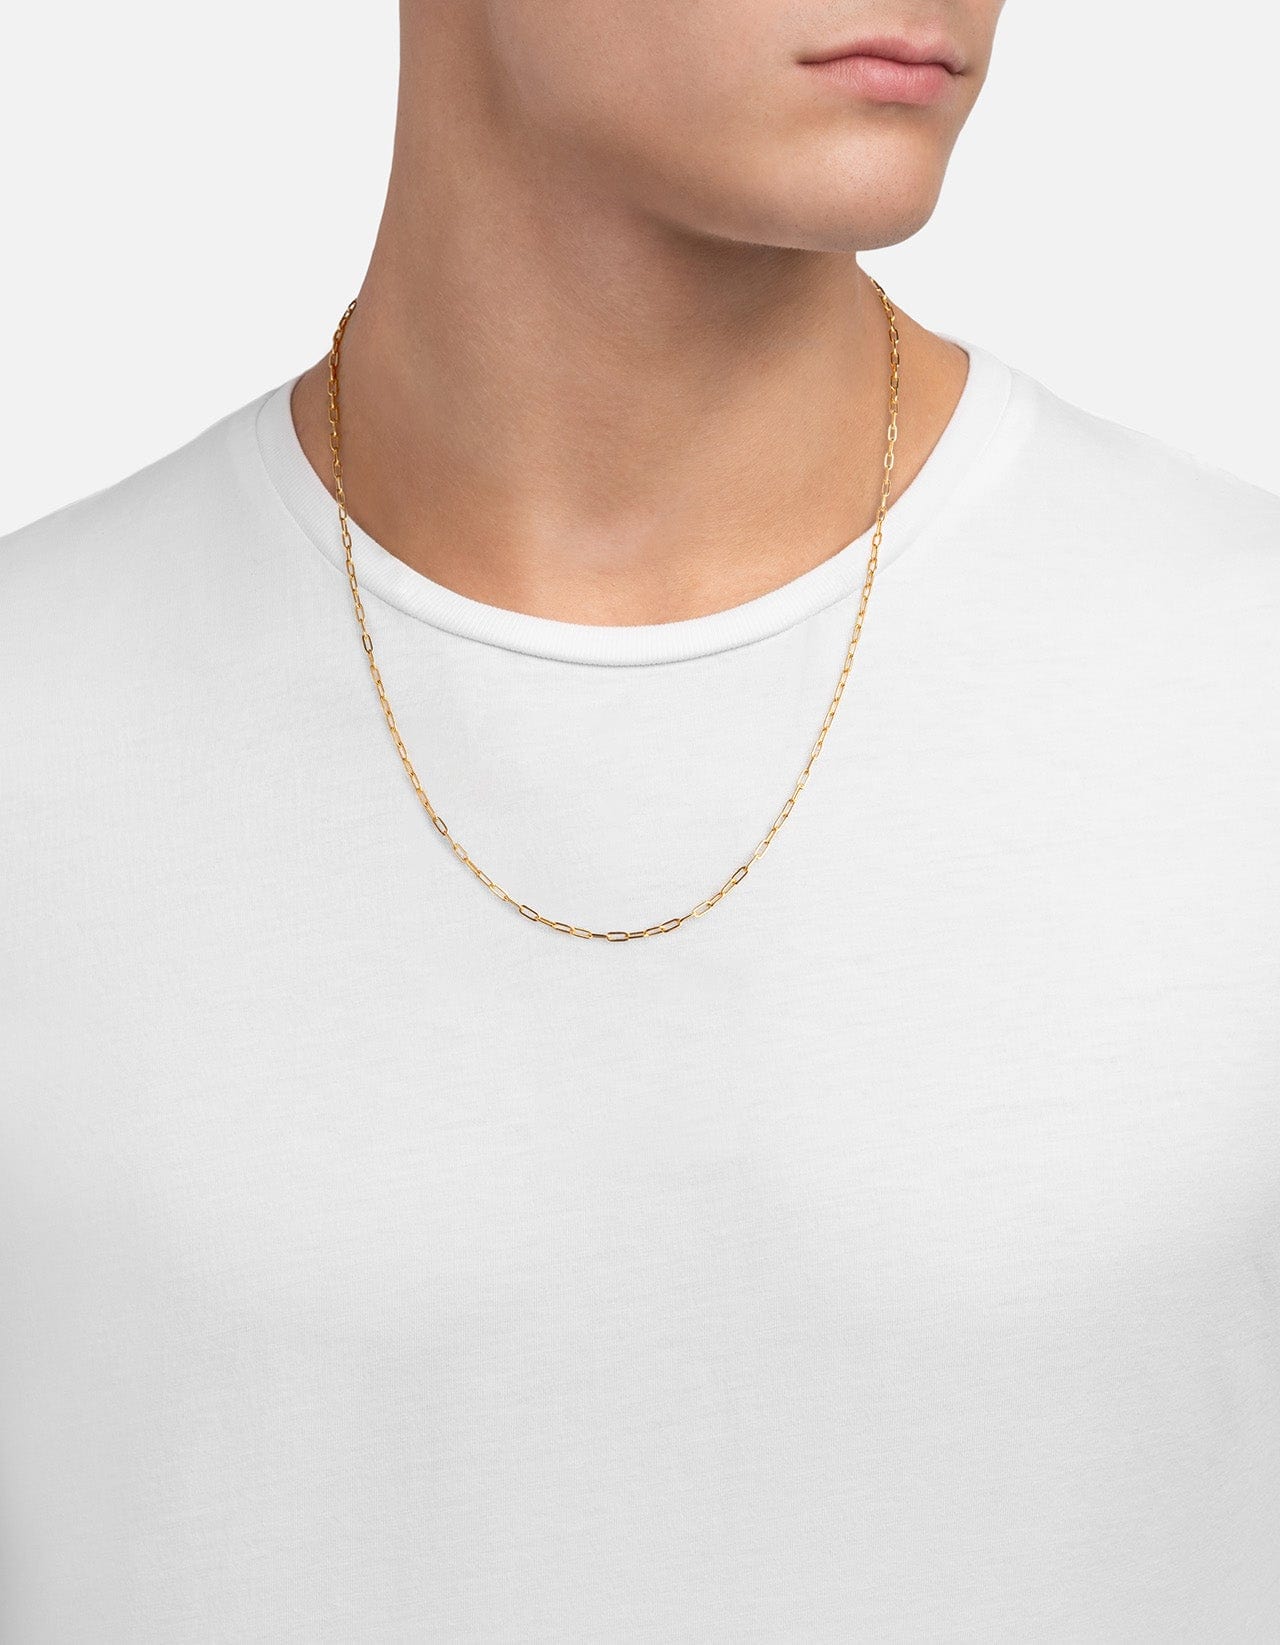 Box Chain Necklace - Black 2.5mm – MODERN OUT